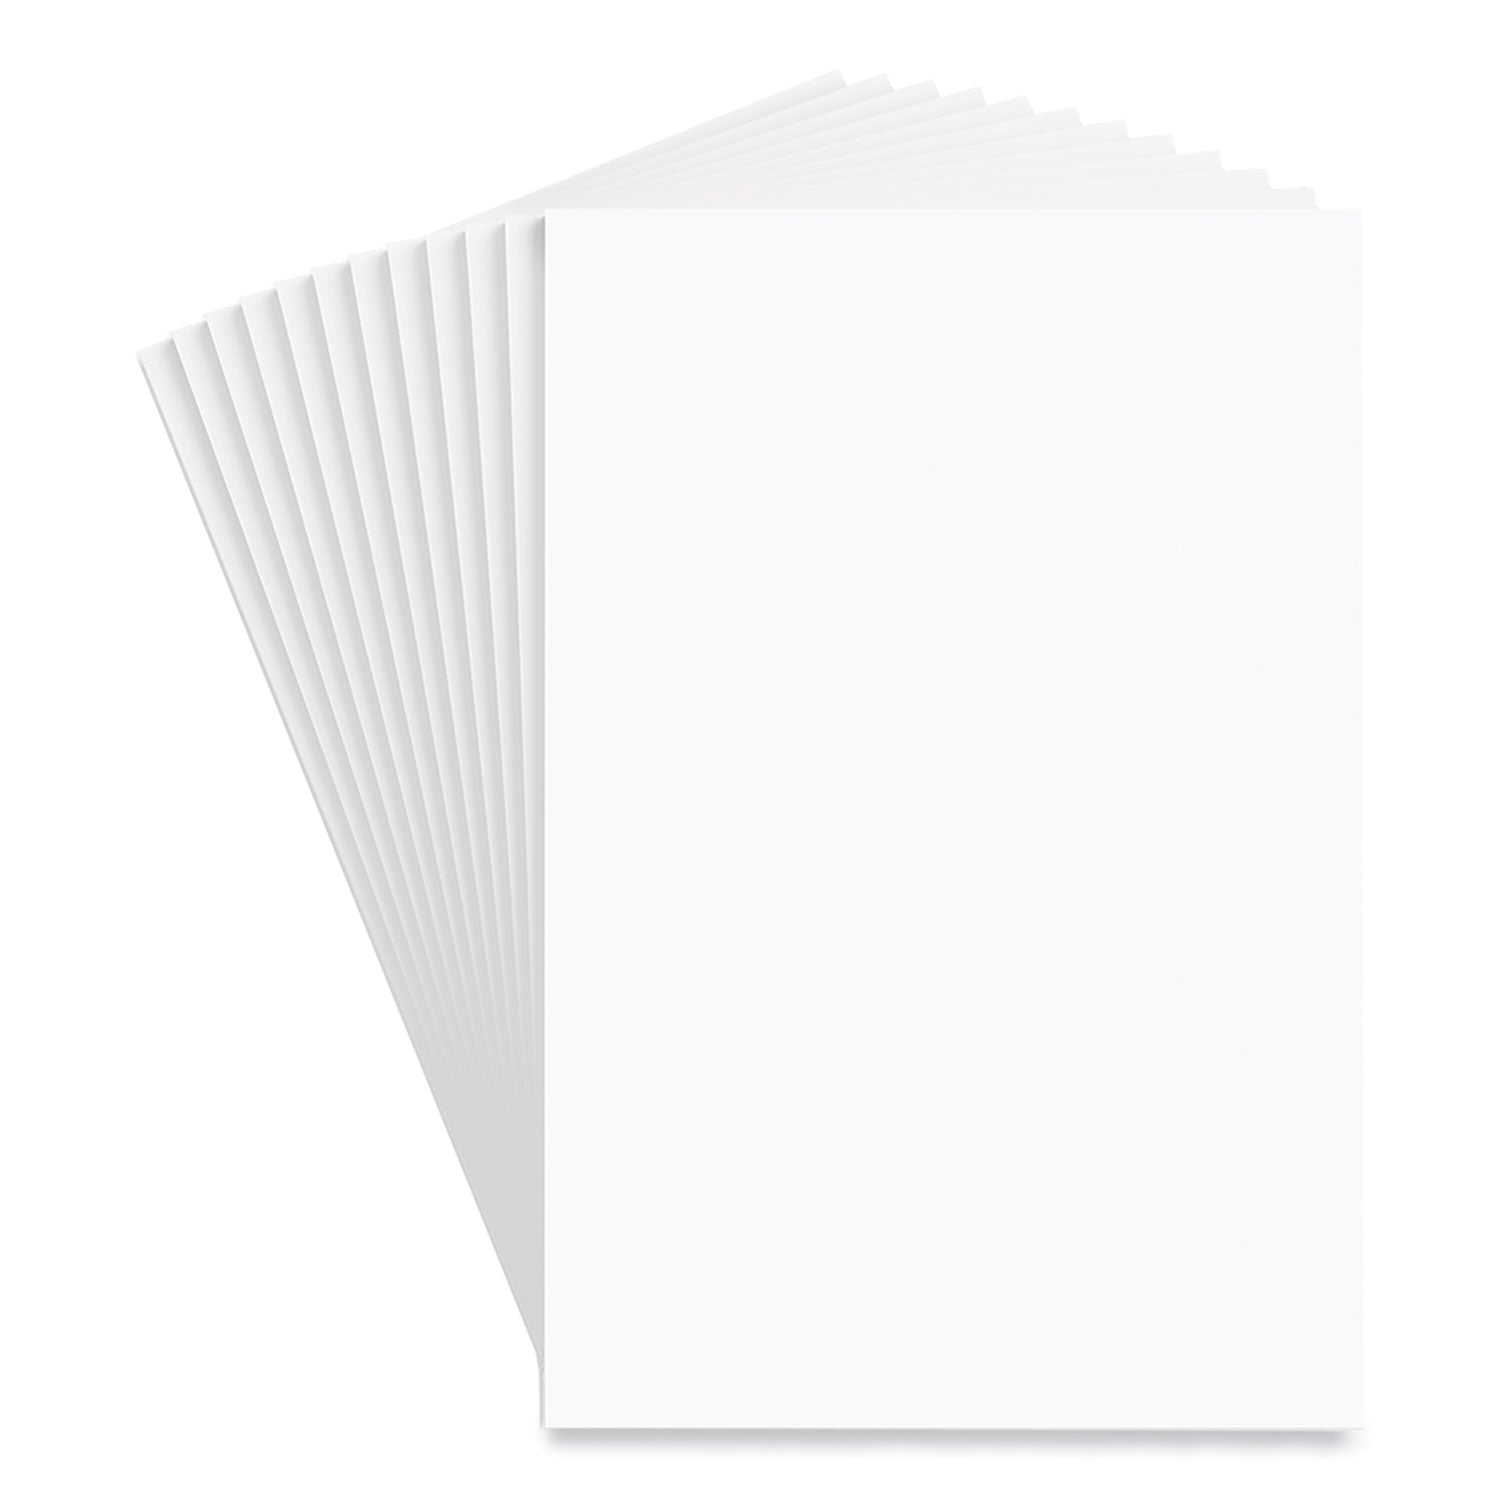 Scratch Pads, Unruled, 4 x 6, White, 100 Sheets, 12/Pack - 